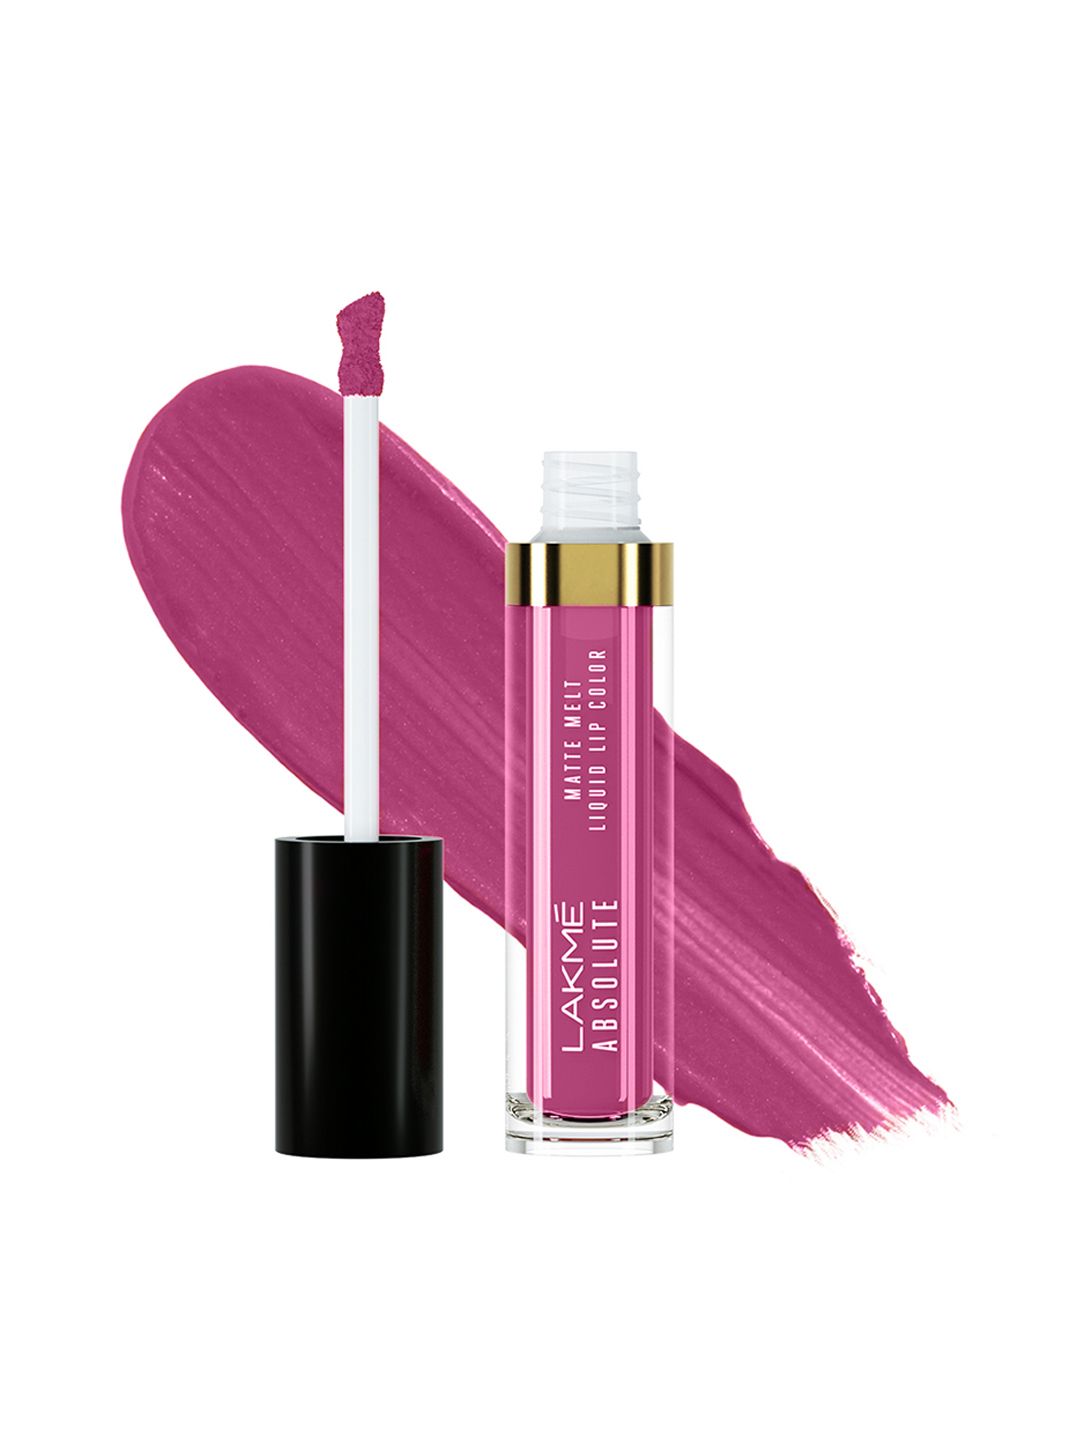 Lakme Absolute Matte Melt Liquid Lip Color - Firey Pink 233 Price in India